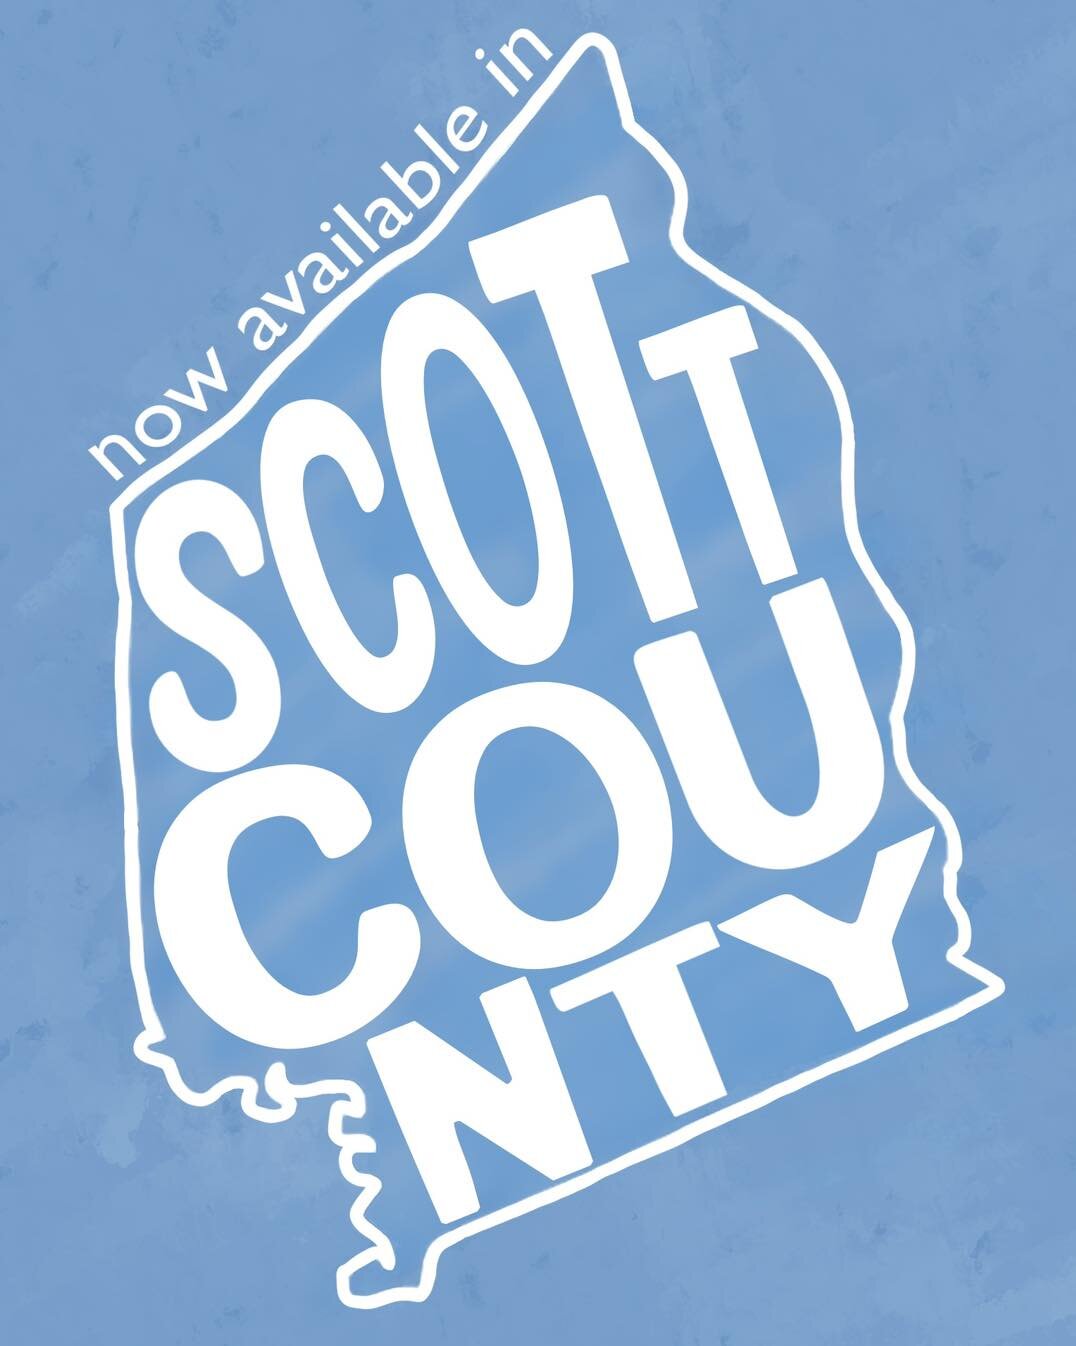 Have you checked out the store locator on our website recently? Rumor has it we added another county!